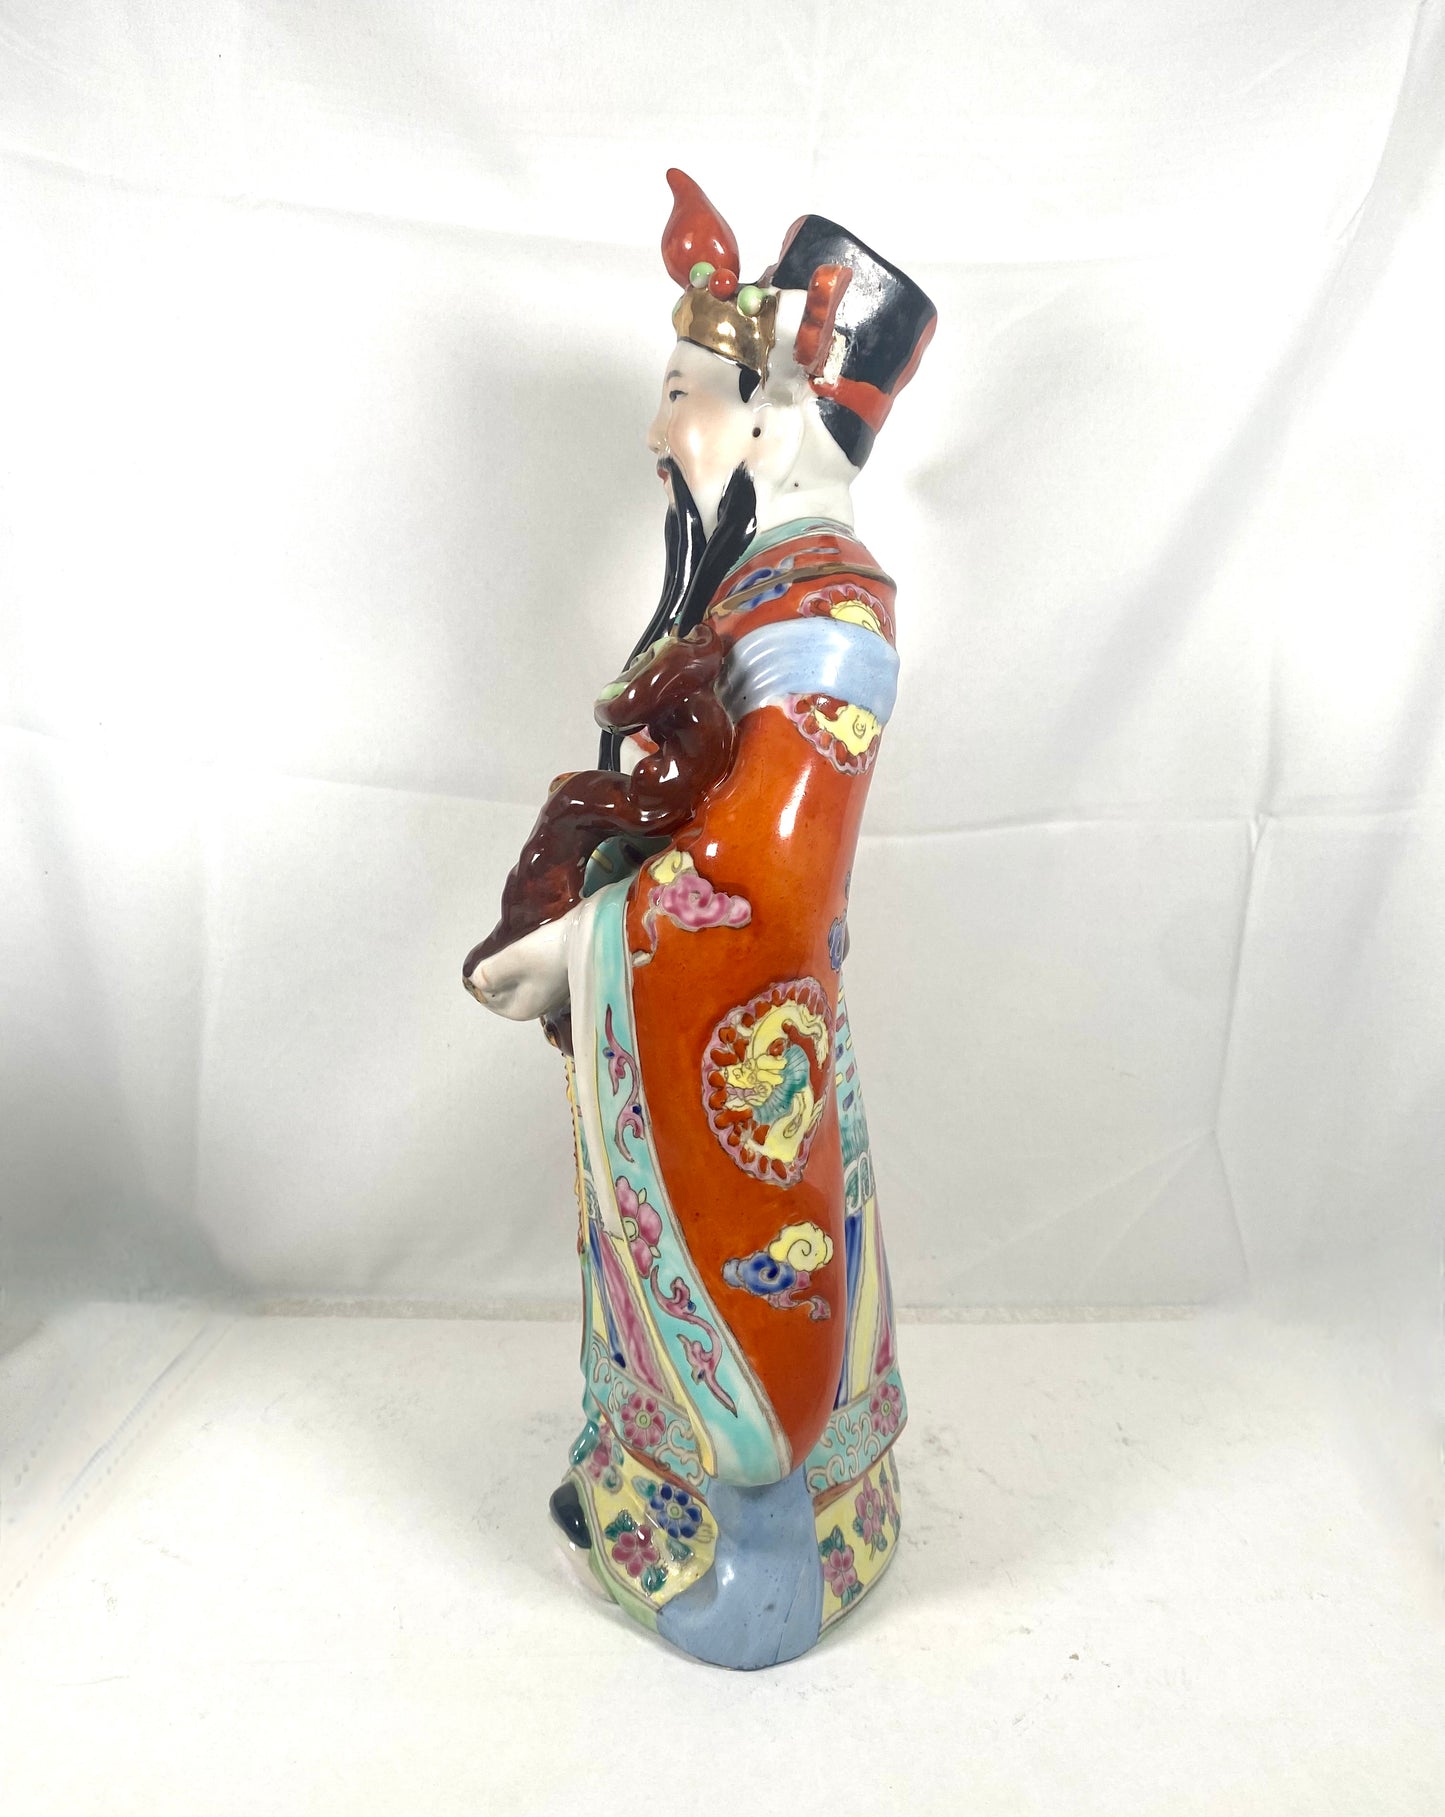 Large Midcentury Cantonese Lu deity with famille rose enamels circa 1960s to 70s, Hong Kong Vintage